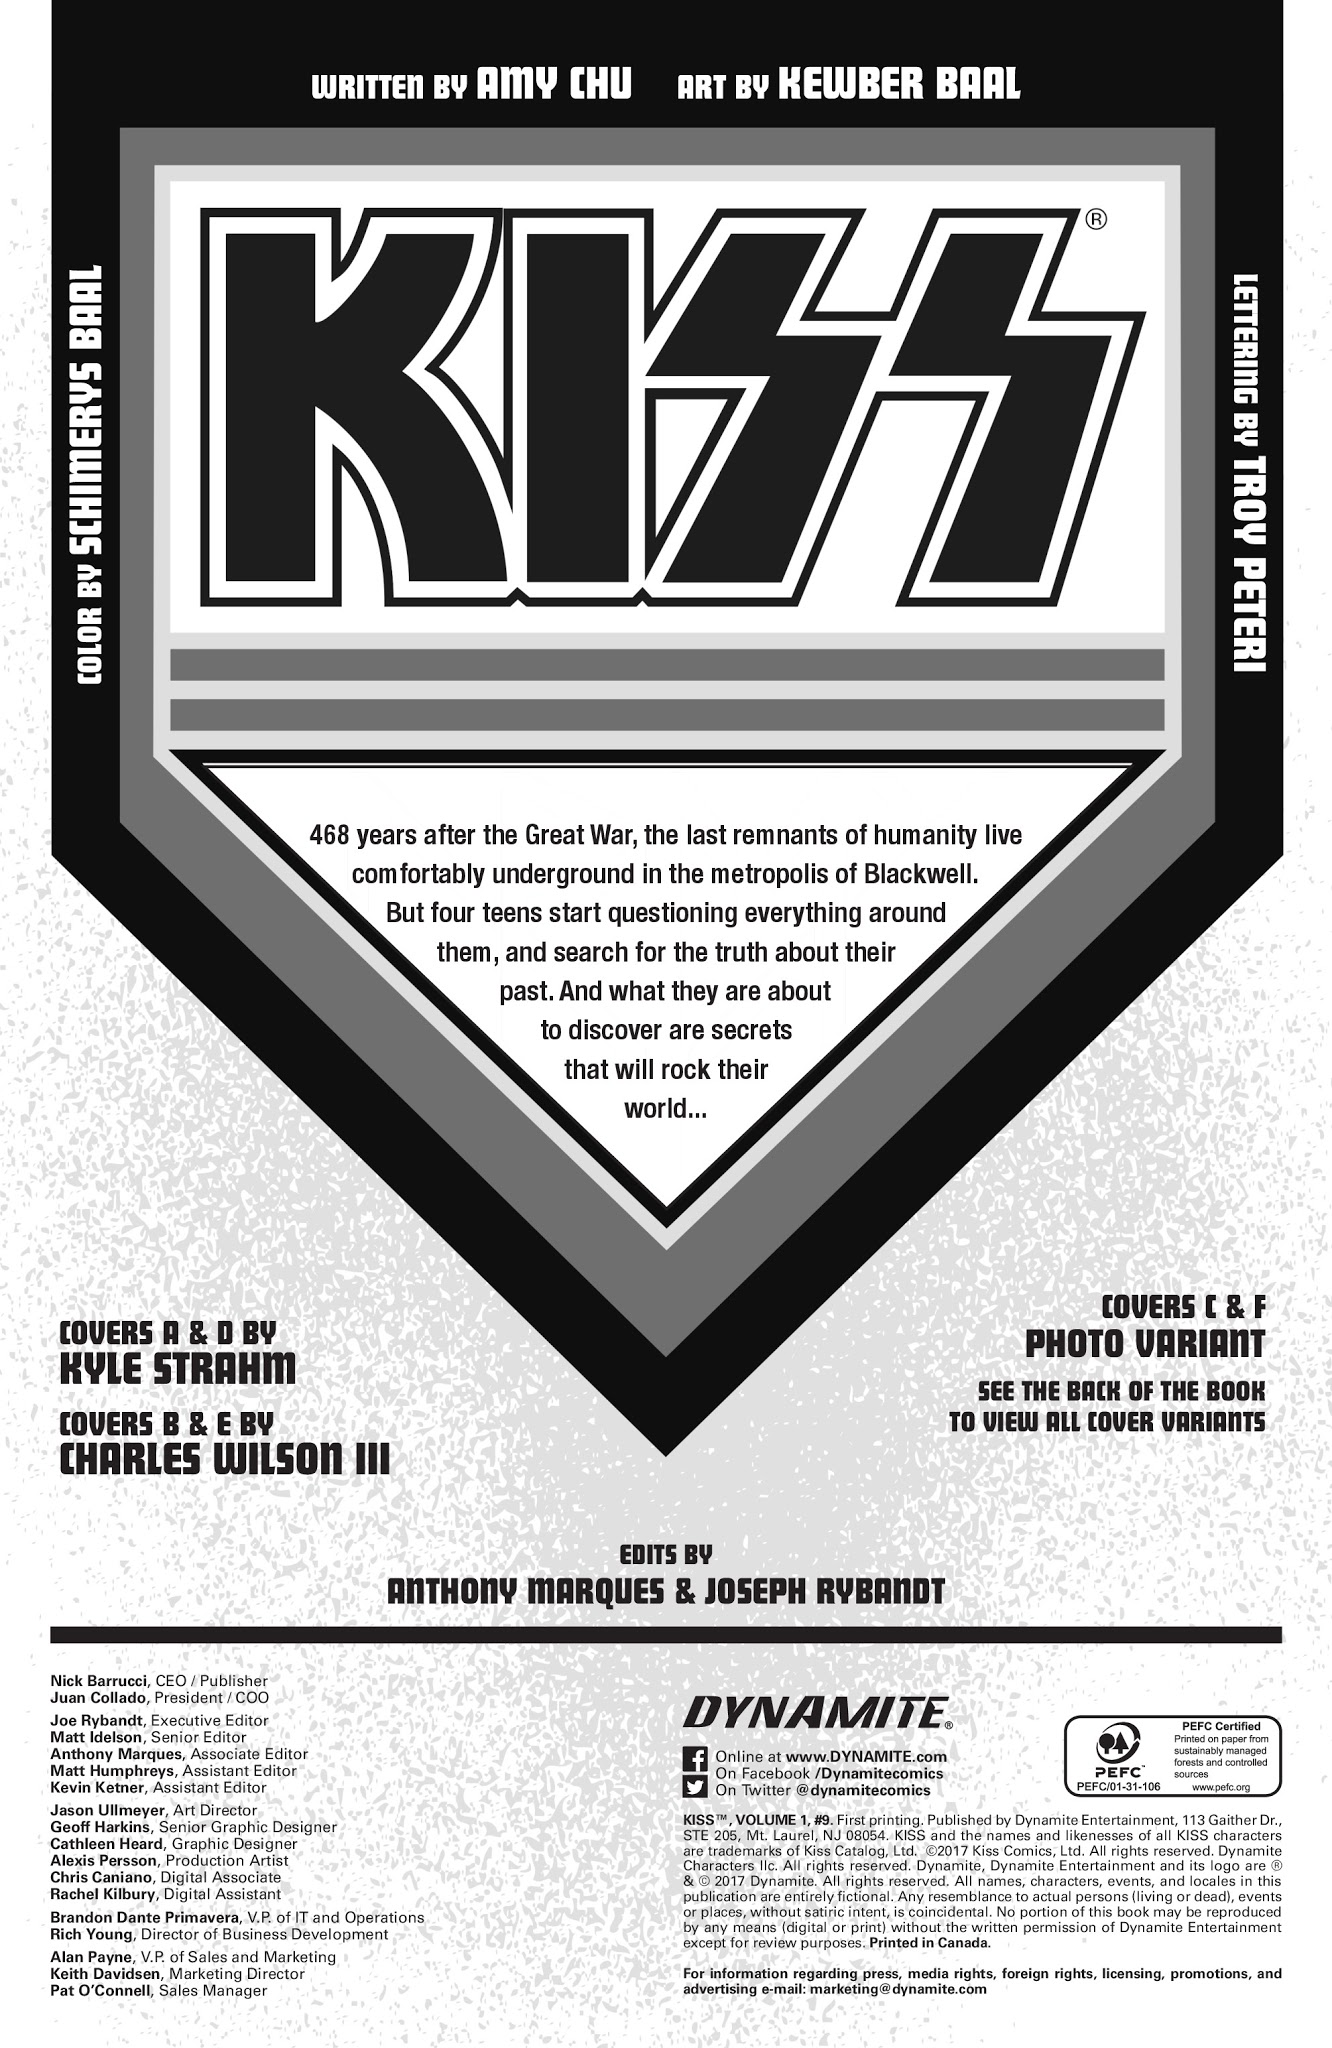 Read online KISS comic -  Issue #9 - 4